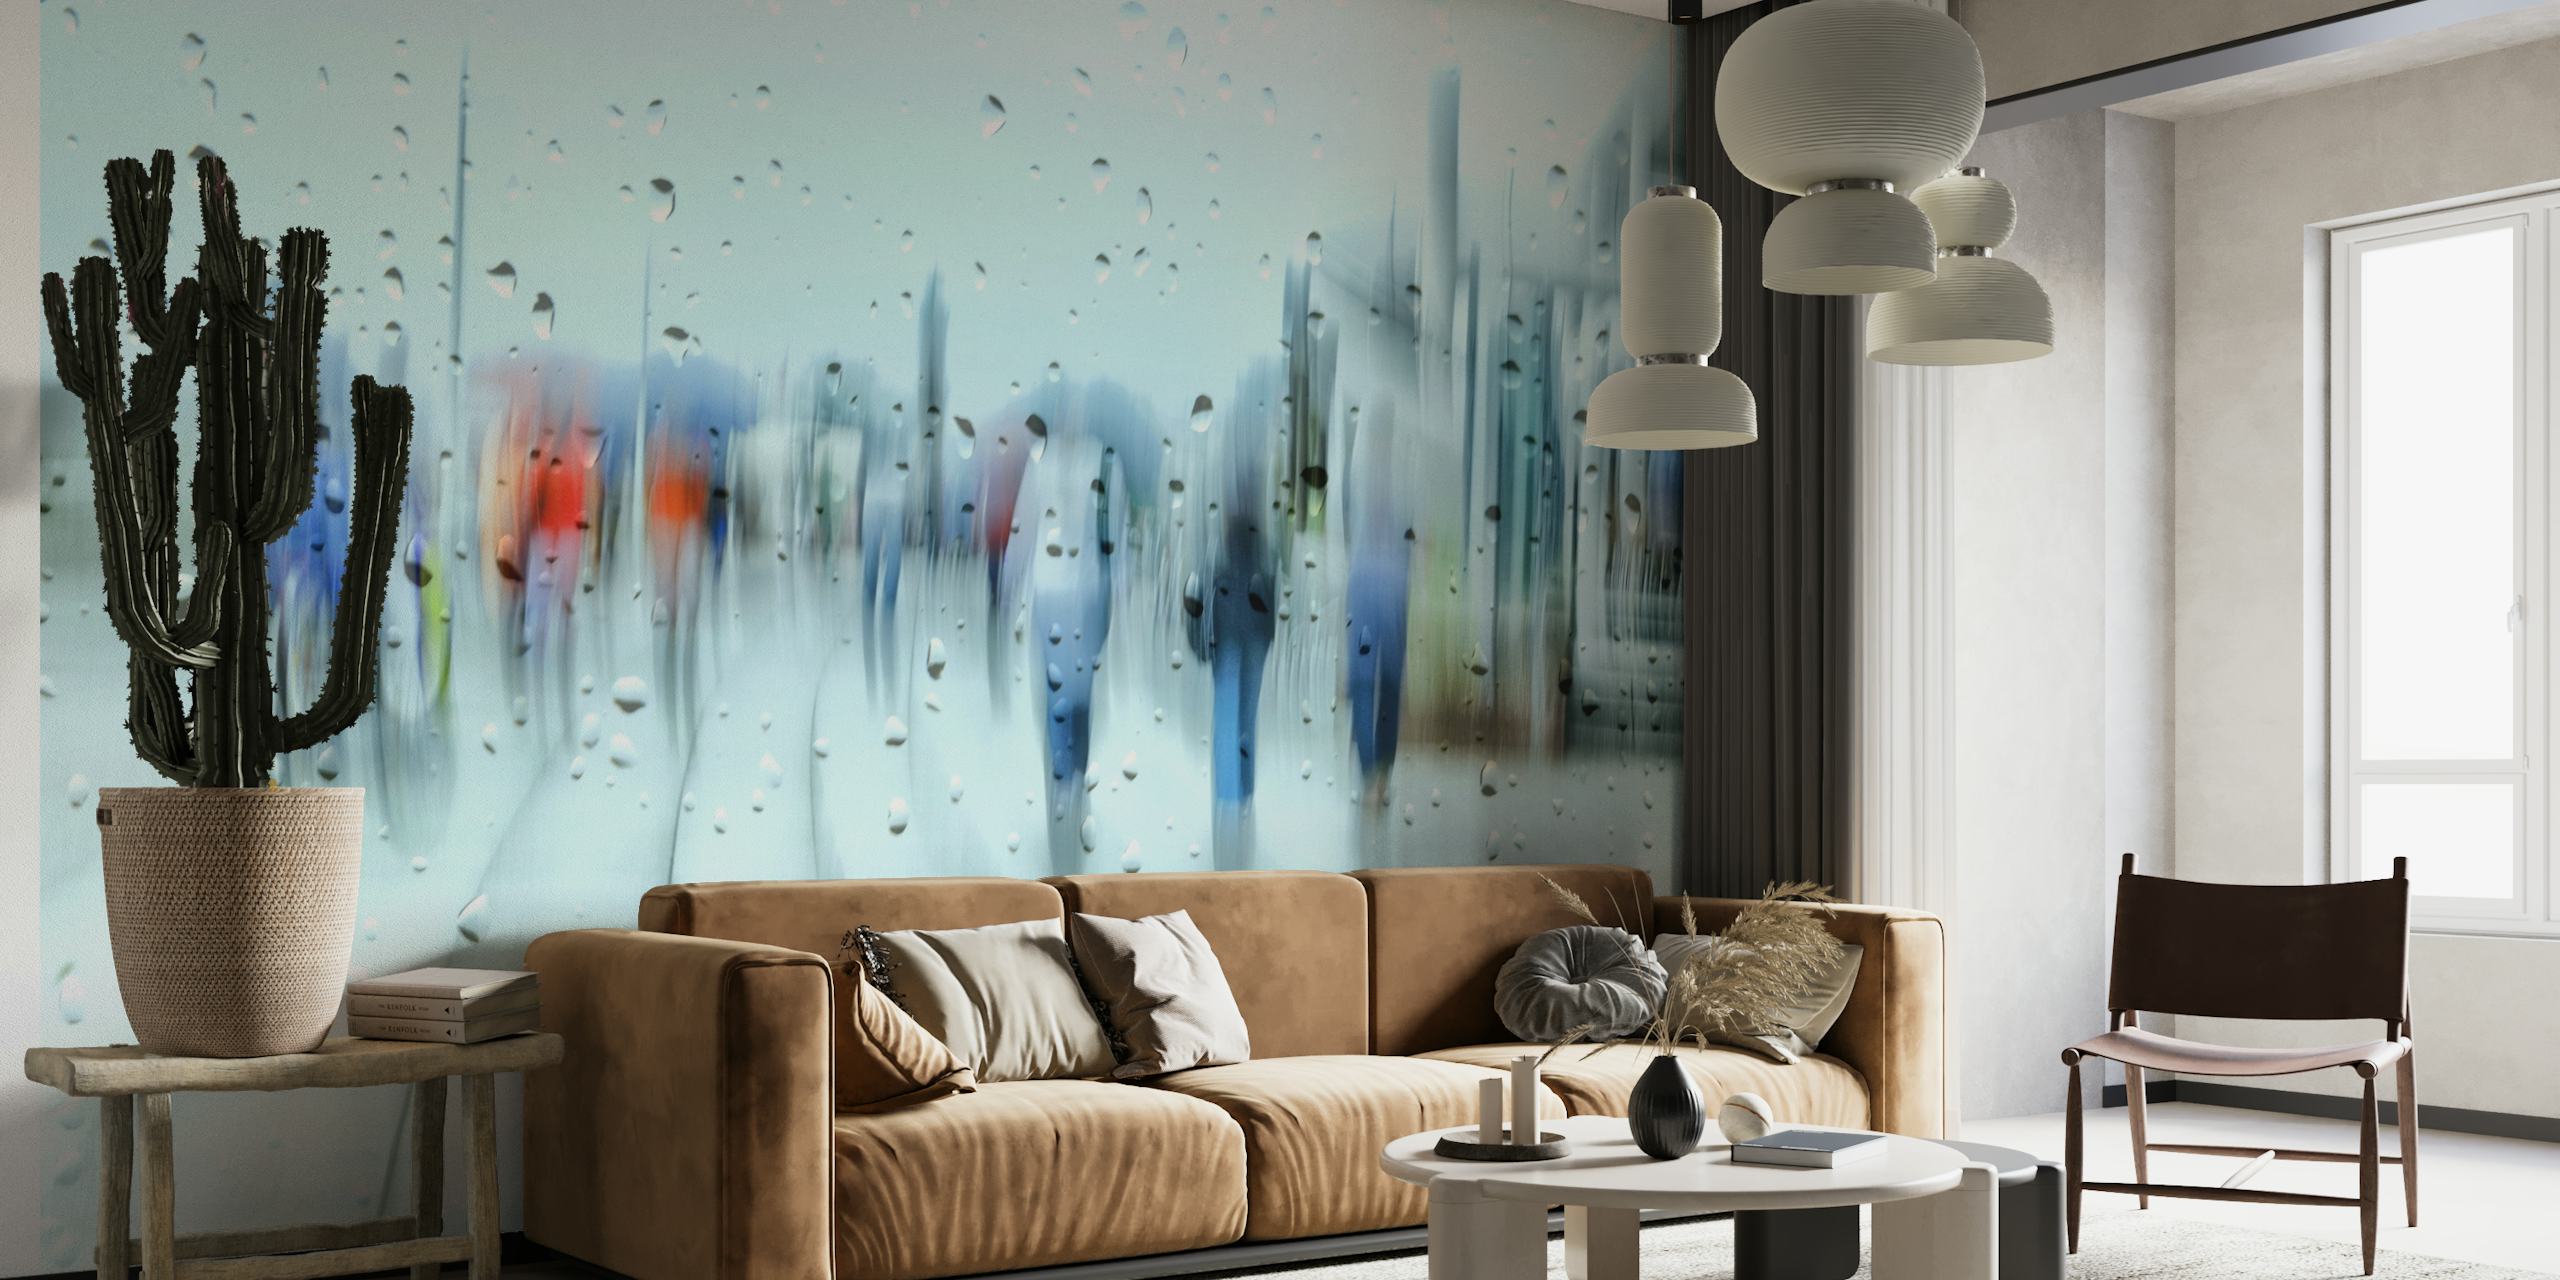 Abstract wall mural with blurred people in rain setting